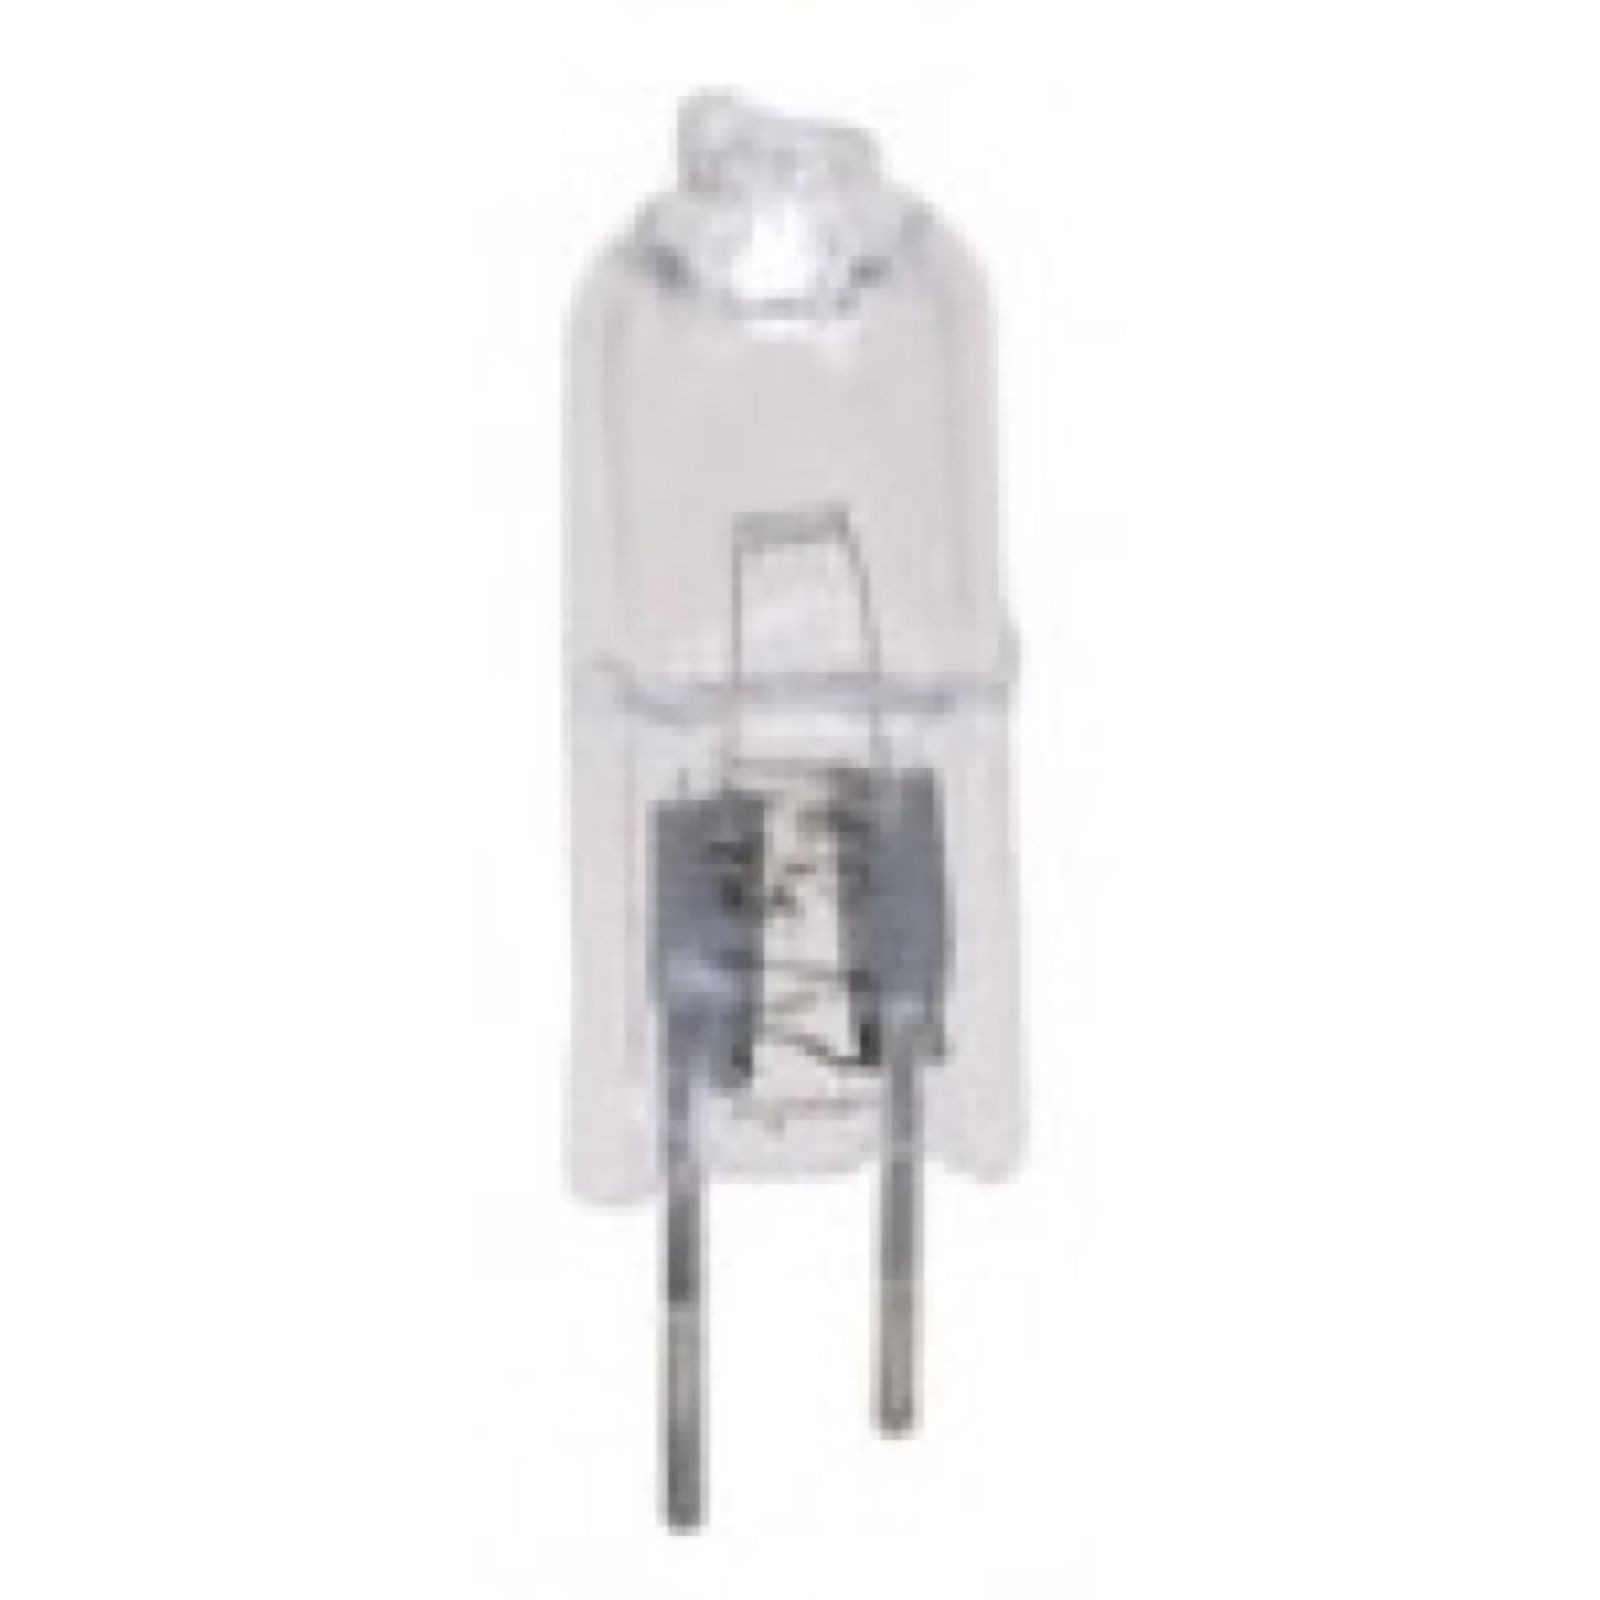 EDGEWATER PARTS B02300891 20W Replacement Light Bulb - Warm White